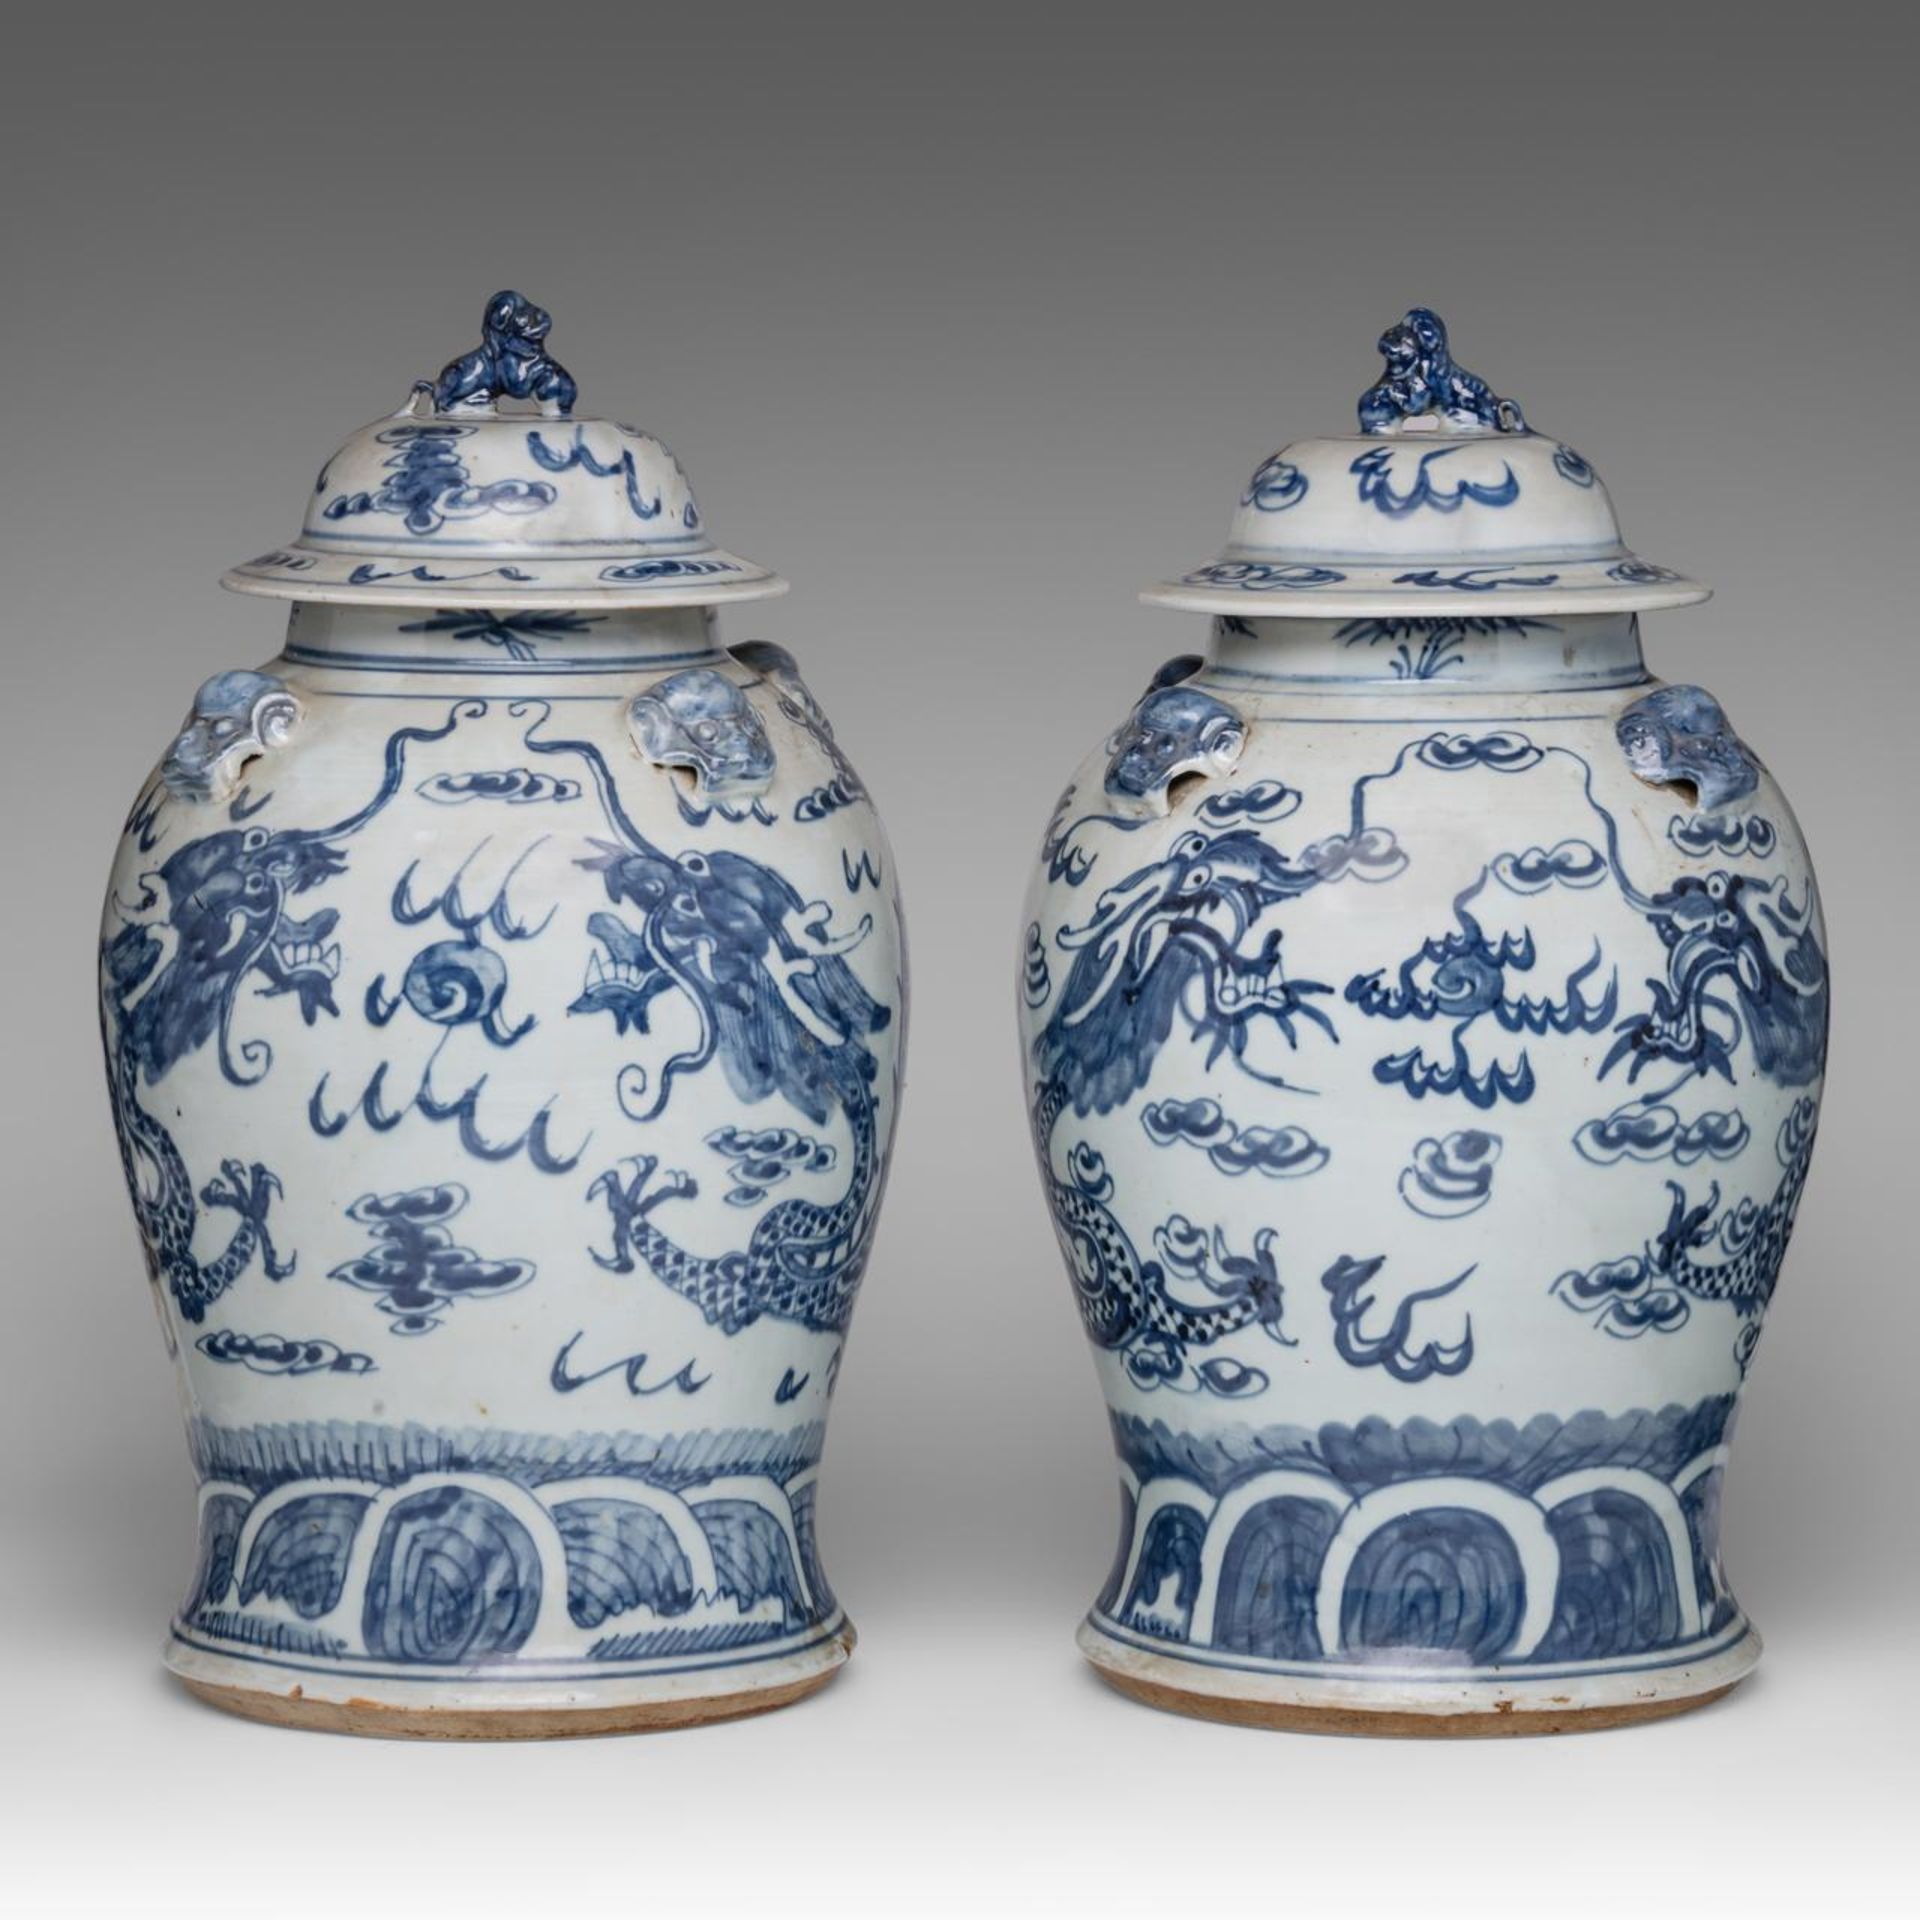 A pair of Chinese blue and white 'Dragons' covered jars, 18thC/19thC, H 45 cm